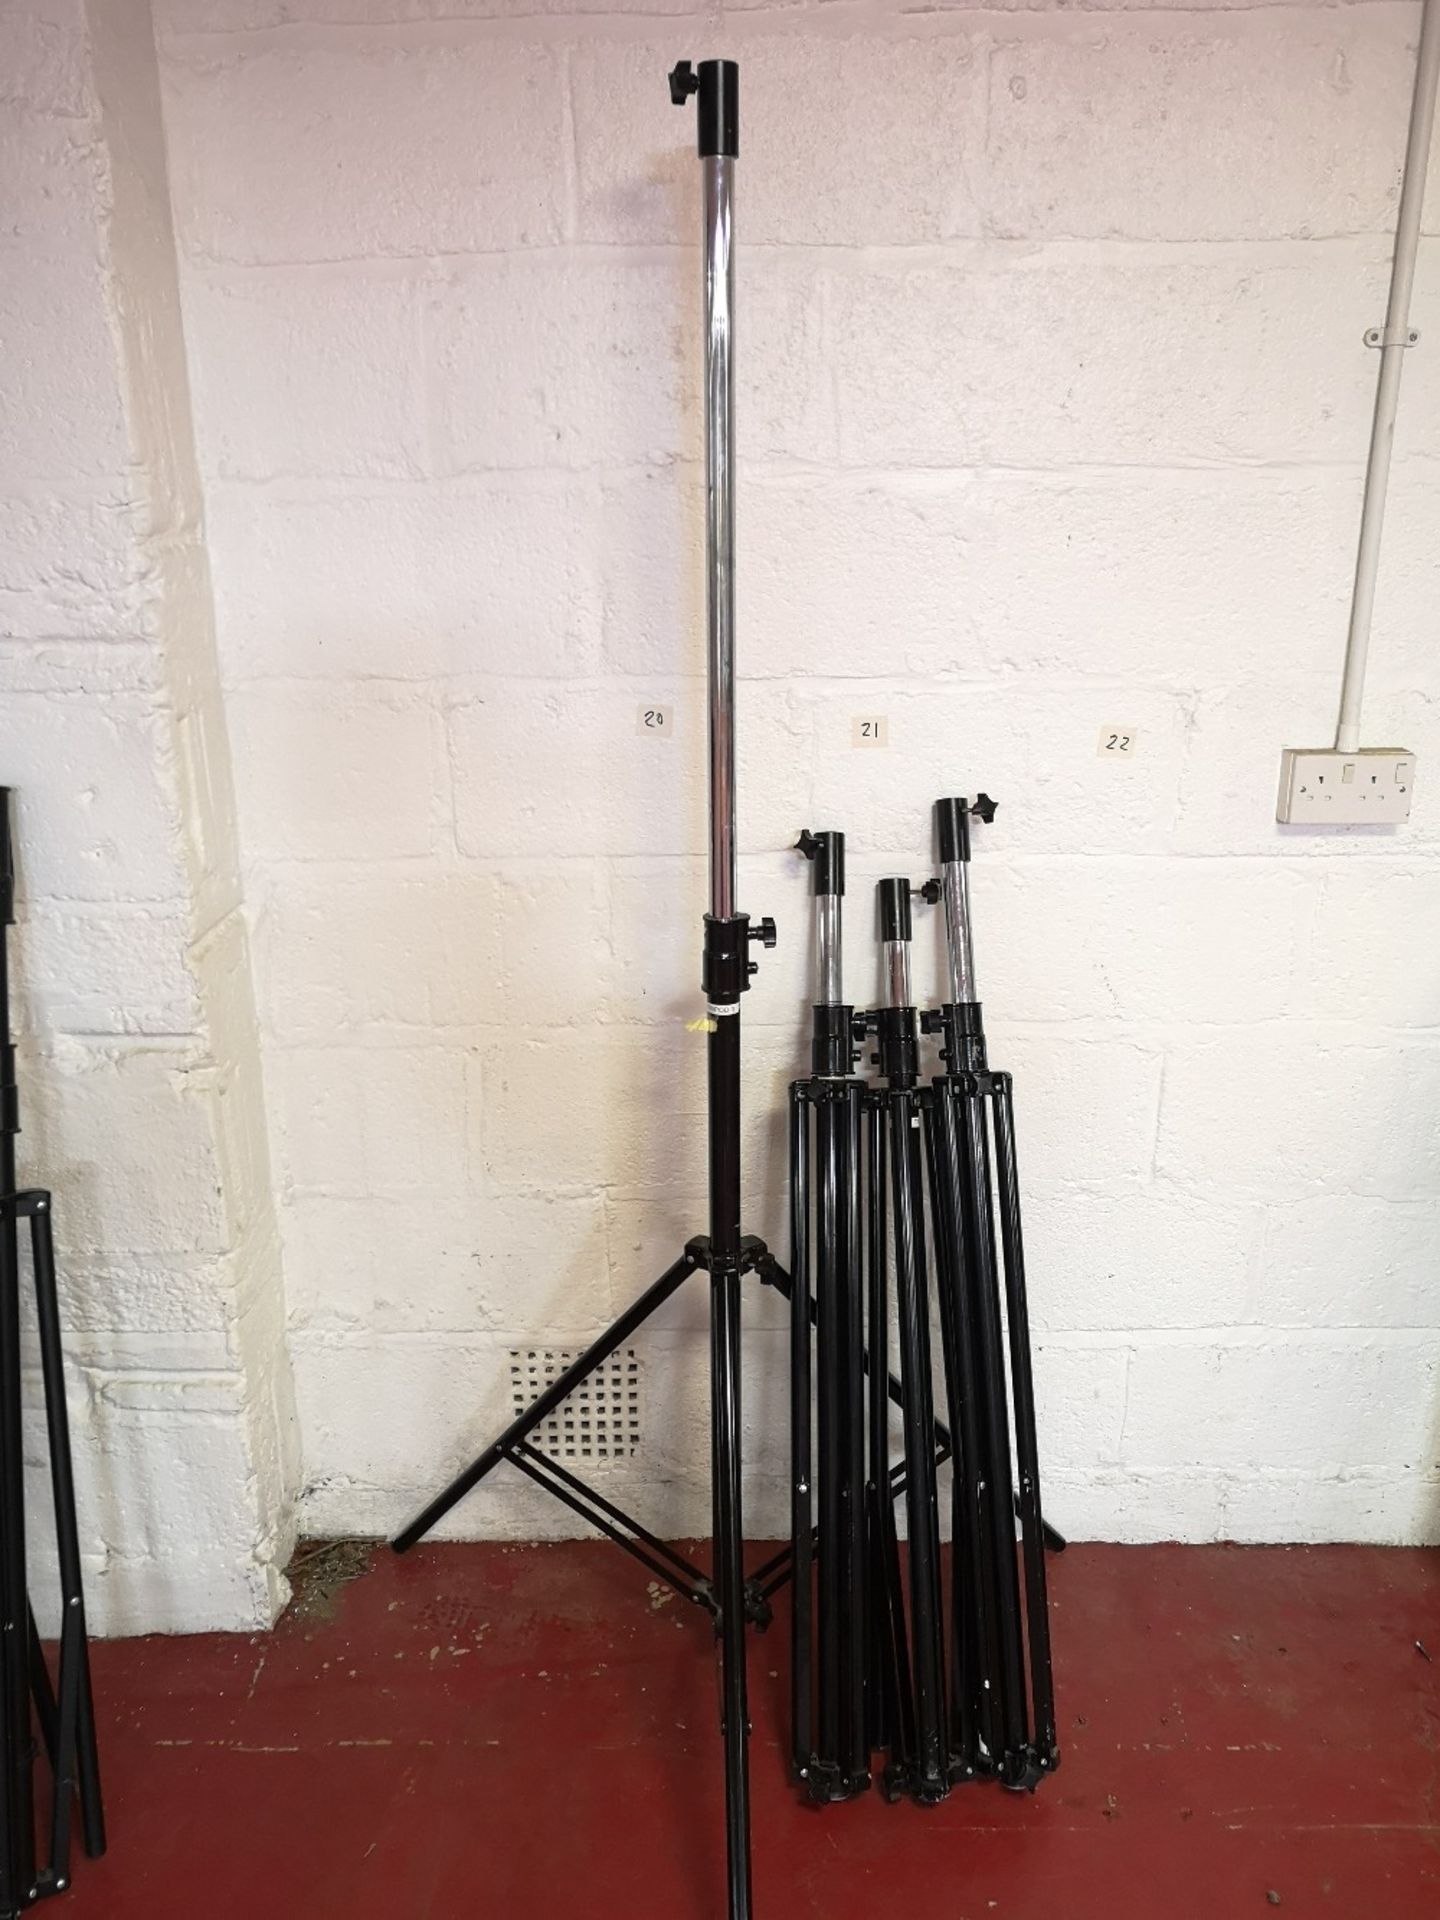 (4) Photography Lighting Tripods - 7.5 ft